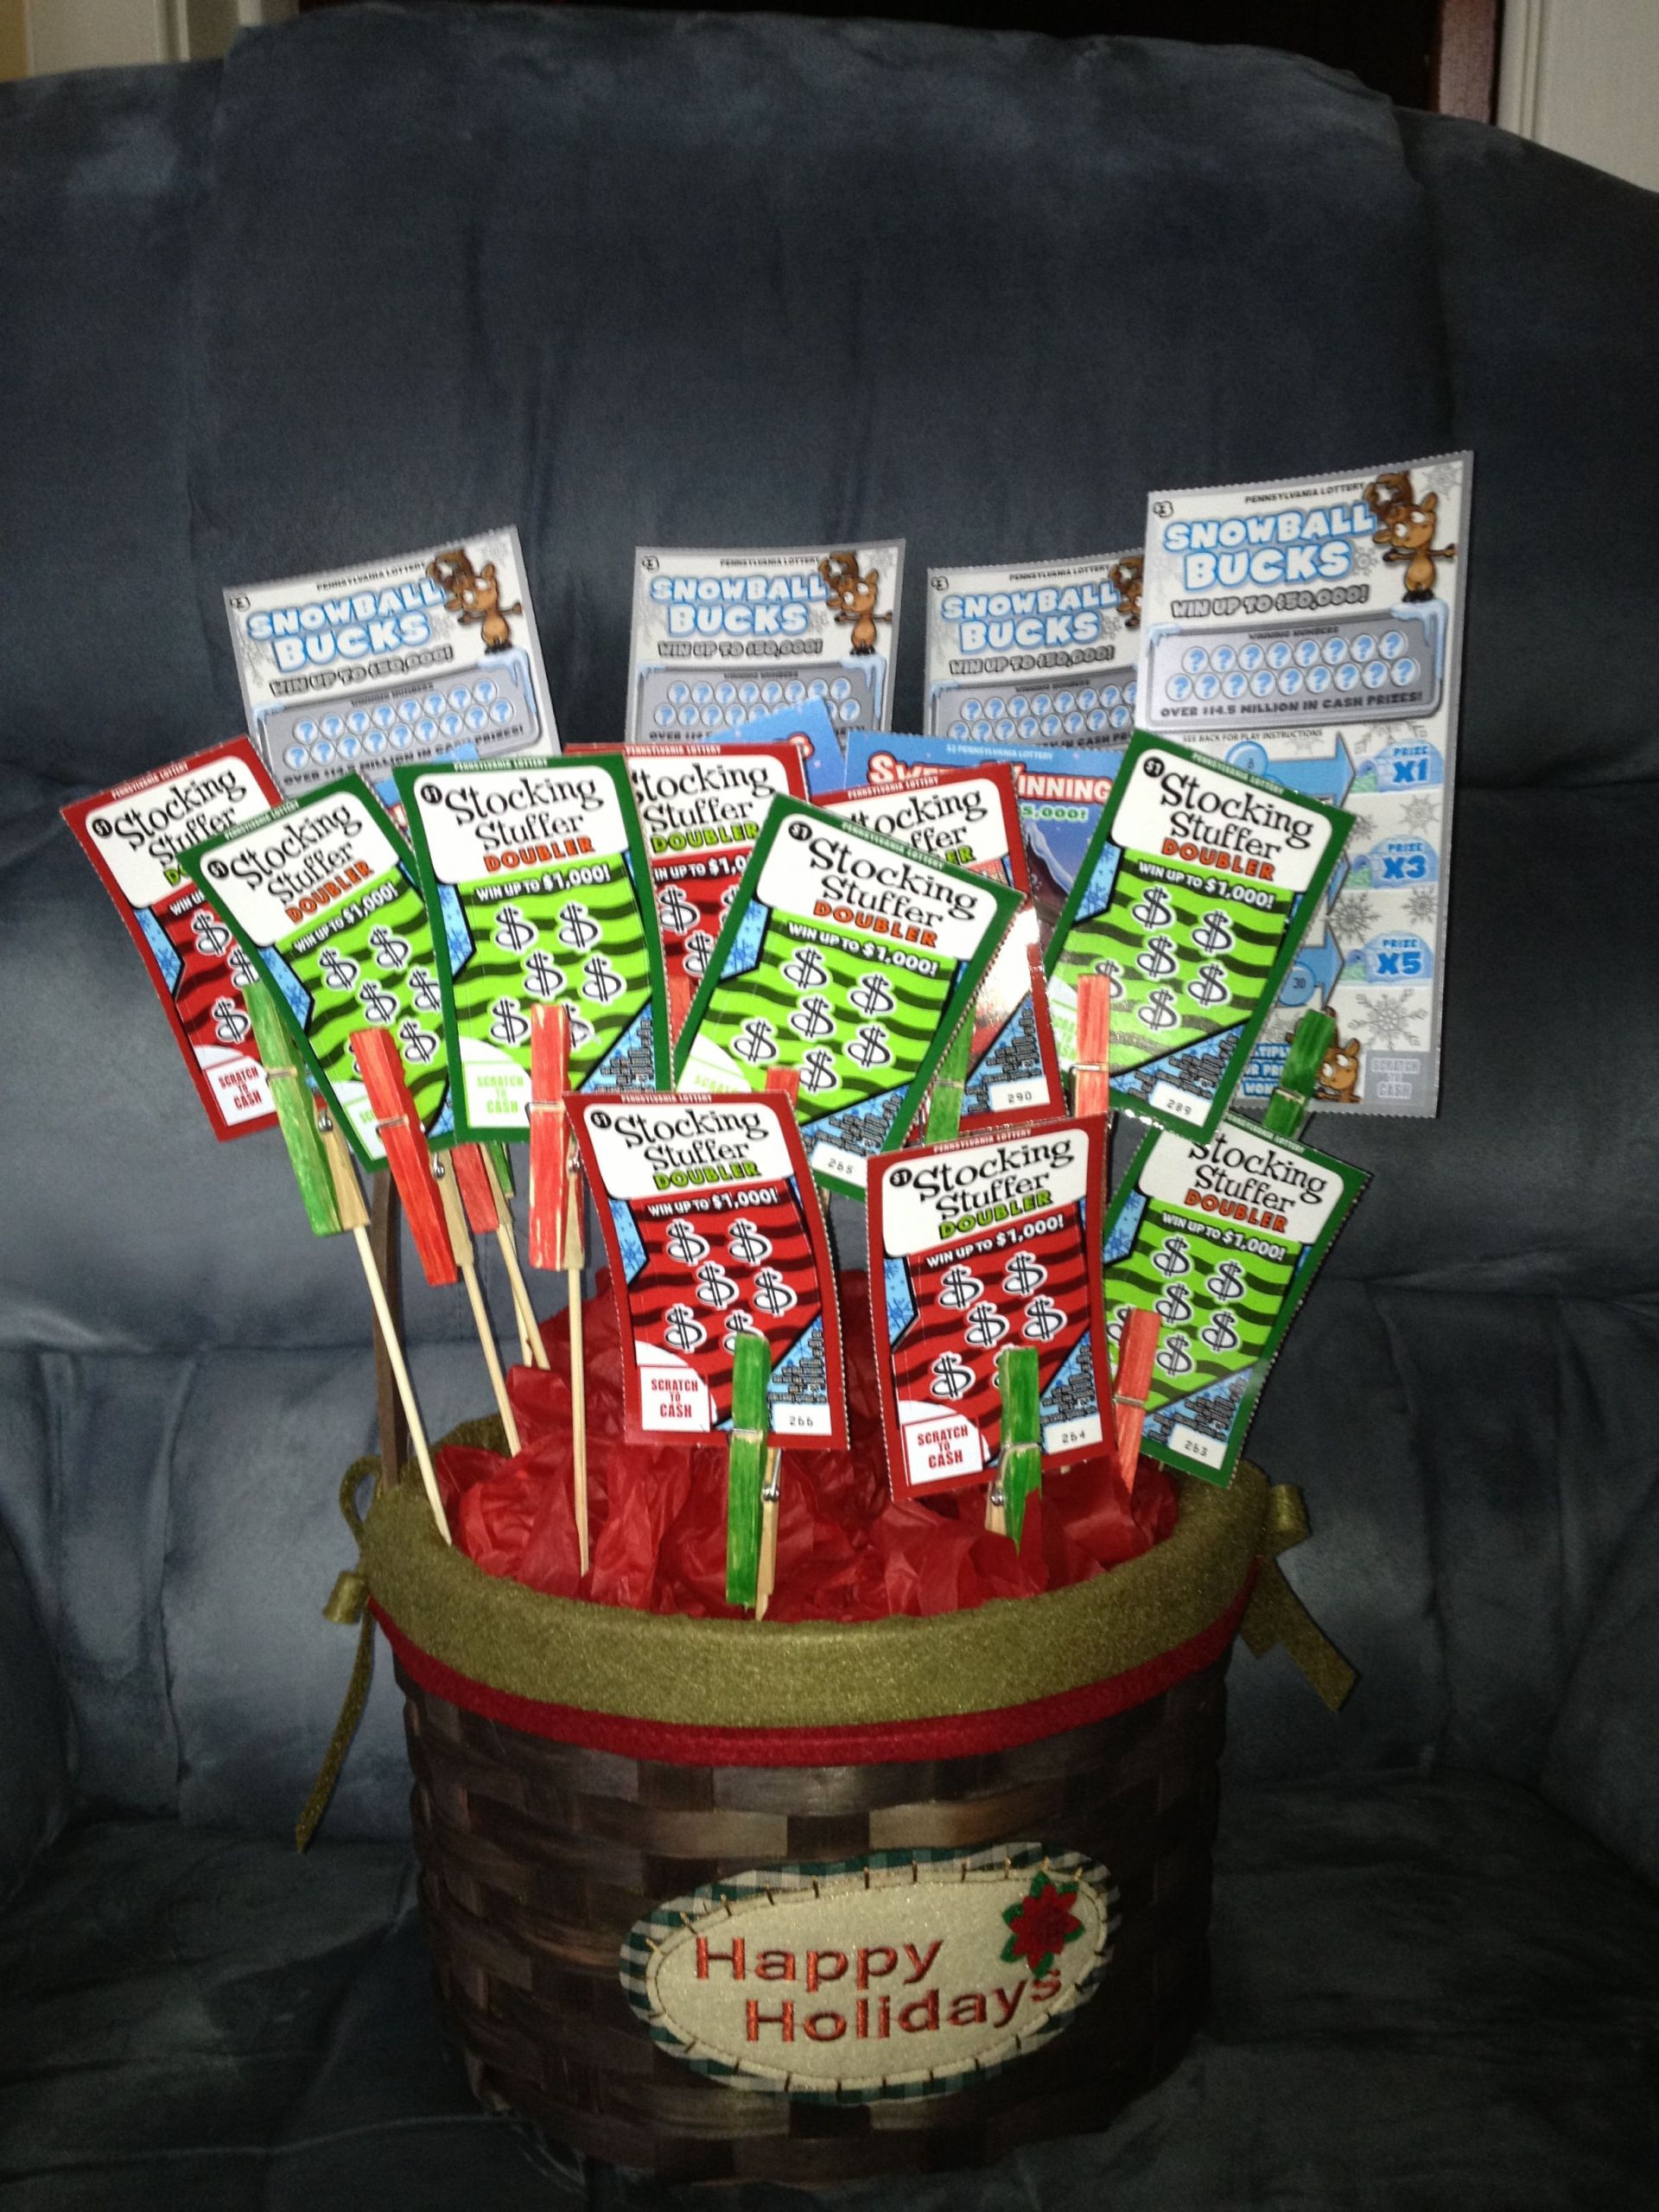 Lottery Ticket Christmas Gift Ideas
 The 25 best Lottery ticket tree ideas on Pinterest